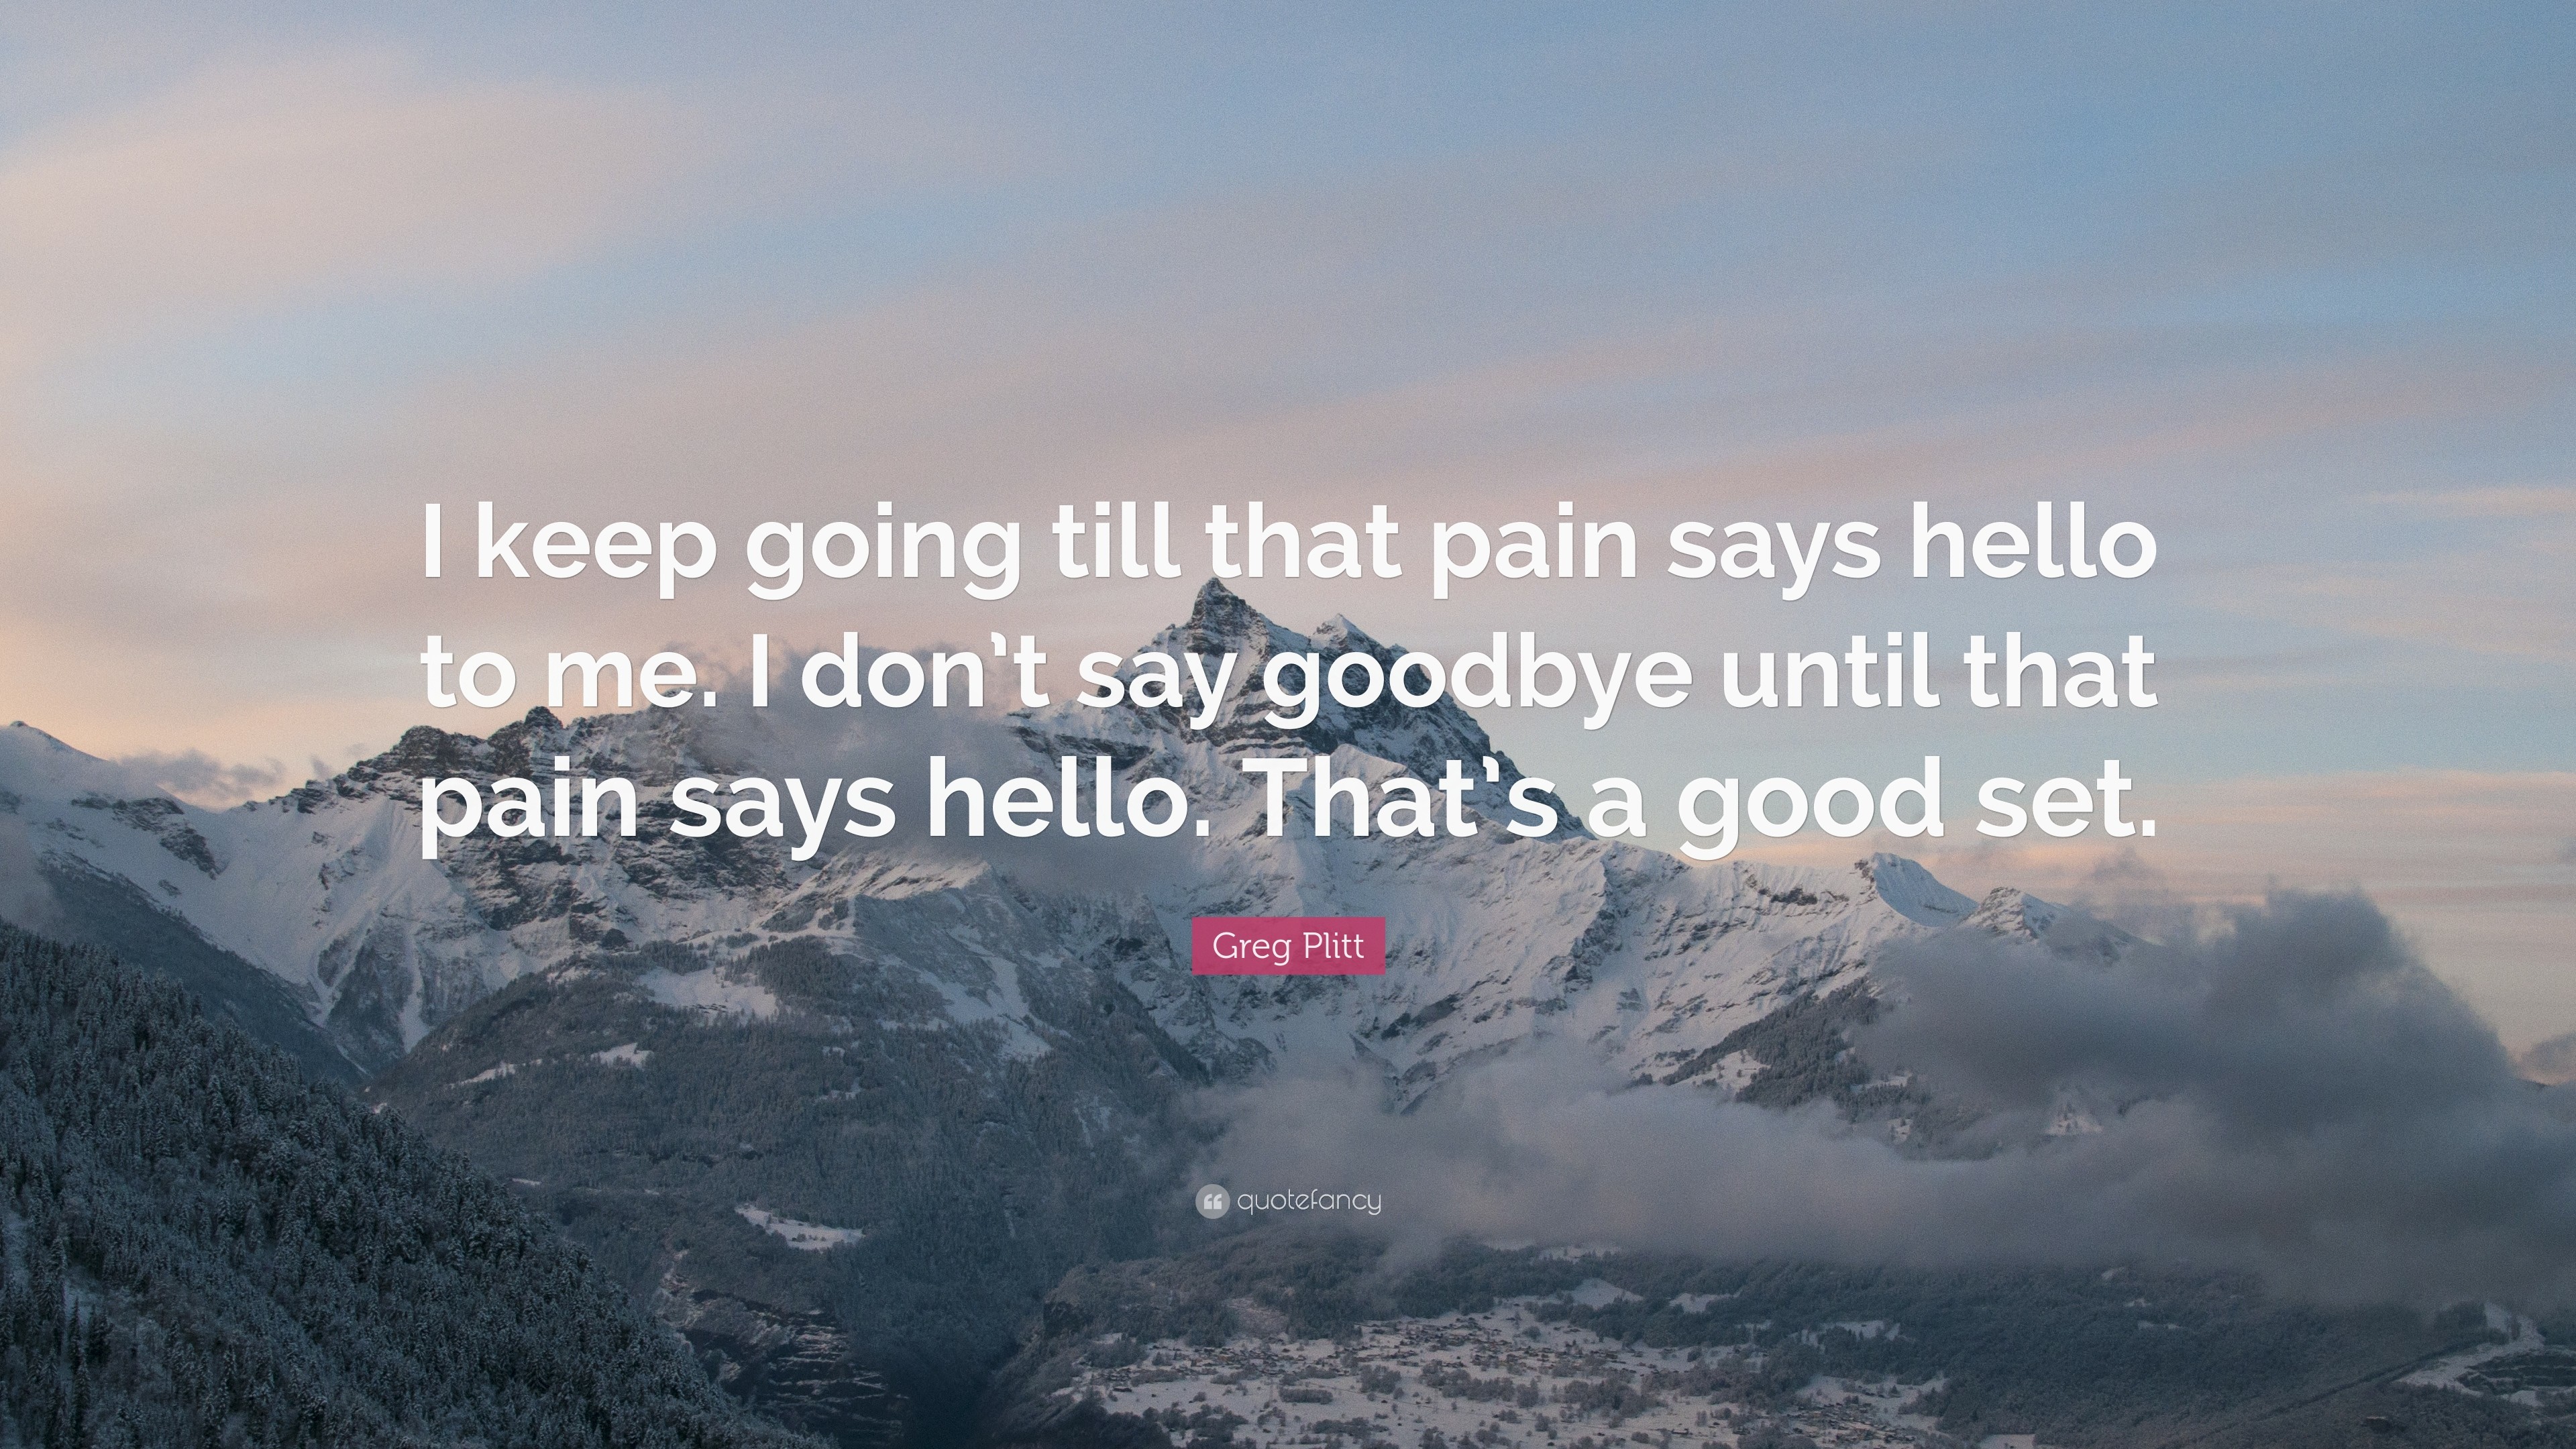 3840x2160 Greg Plitt Quote: “I keep going till that pain says hello to me.